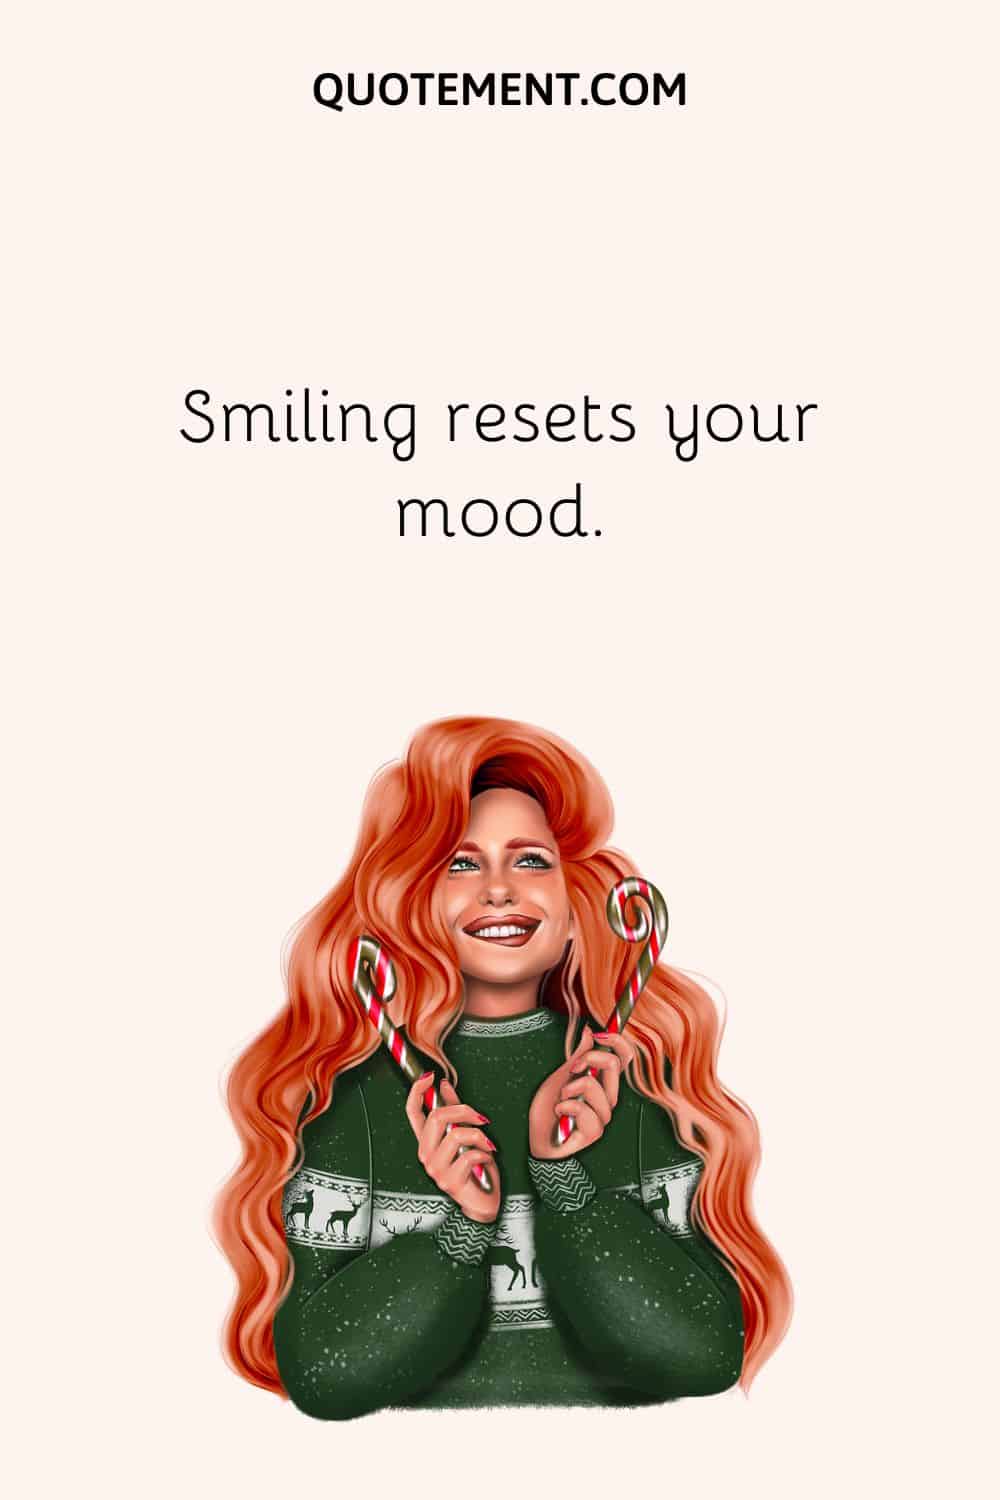  Smiling resets your mood